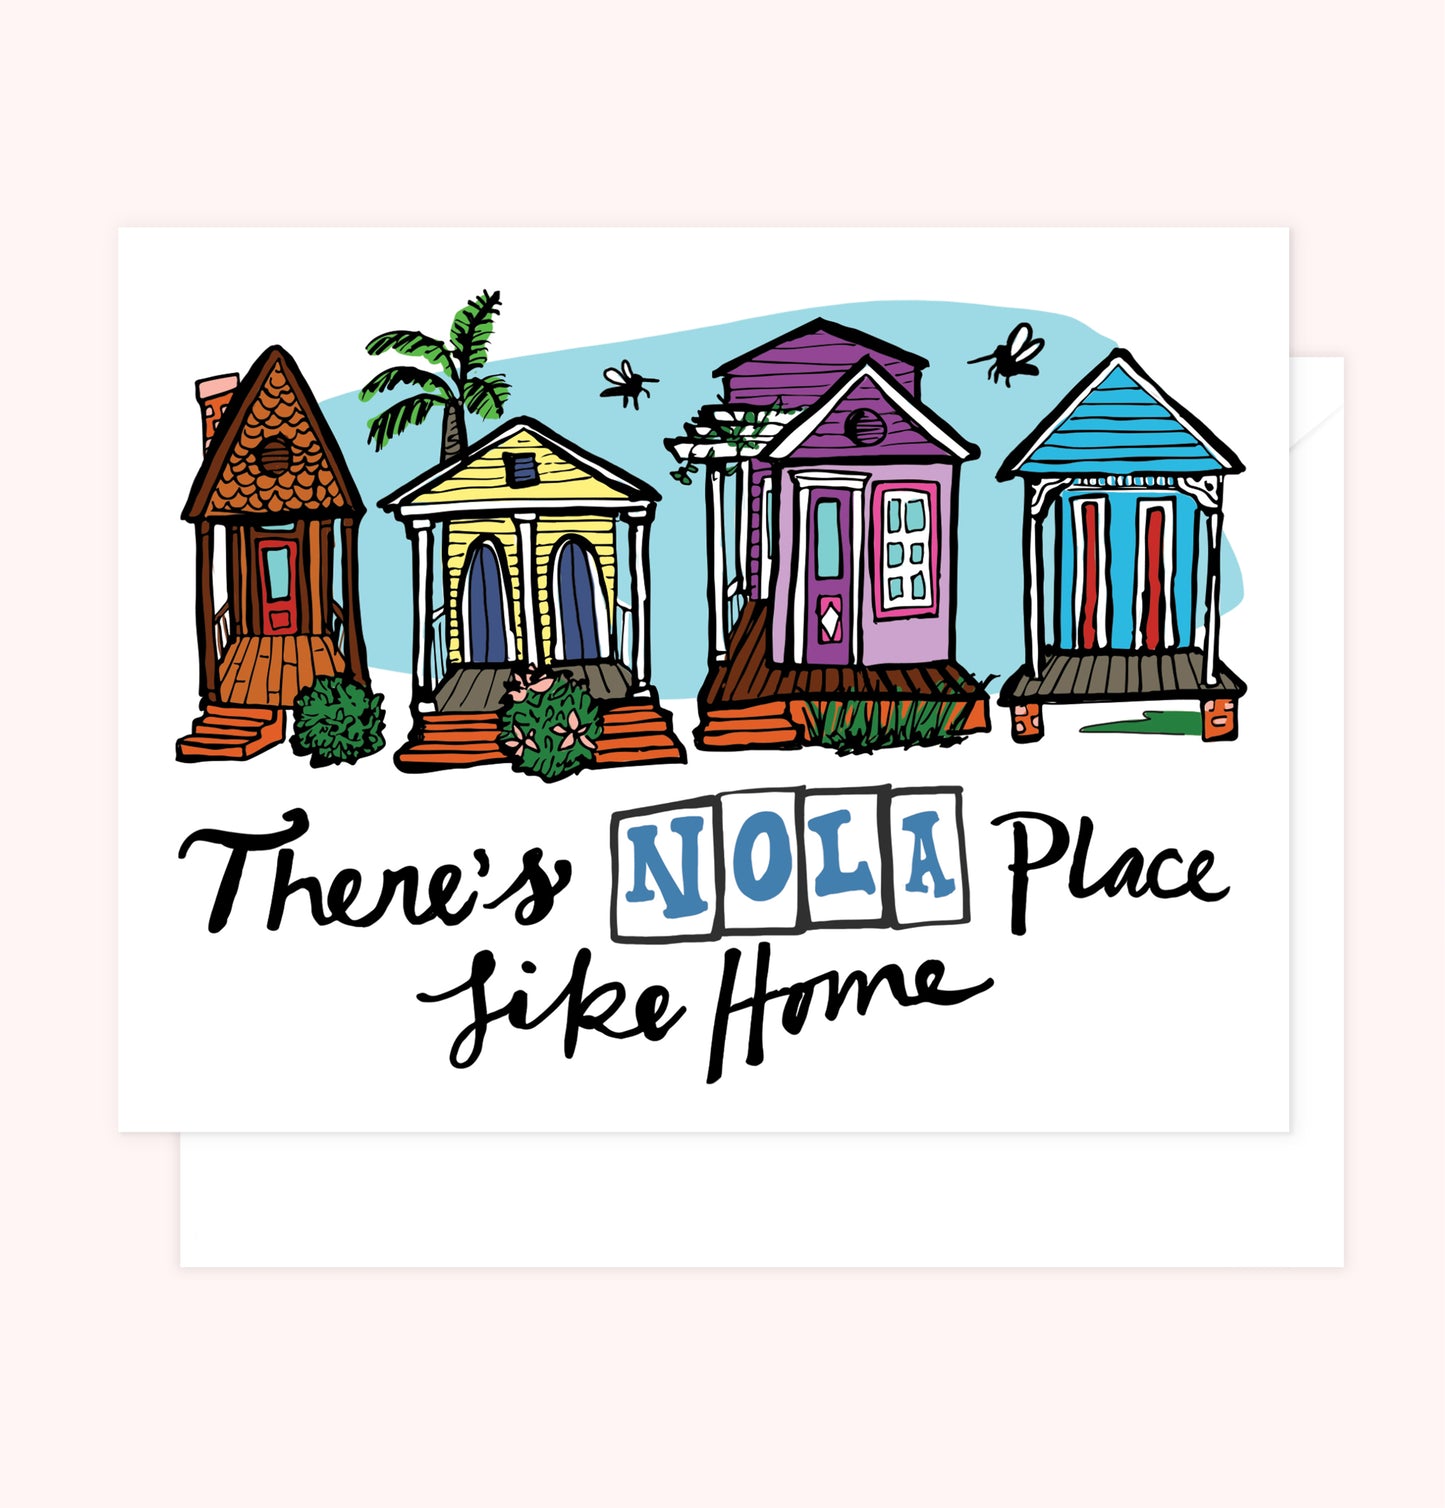 "There's NOLA Place Like Home" Card